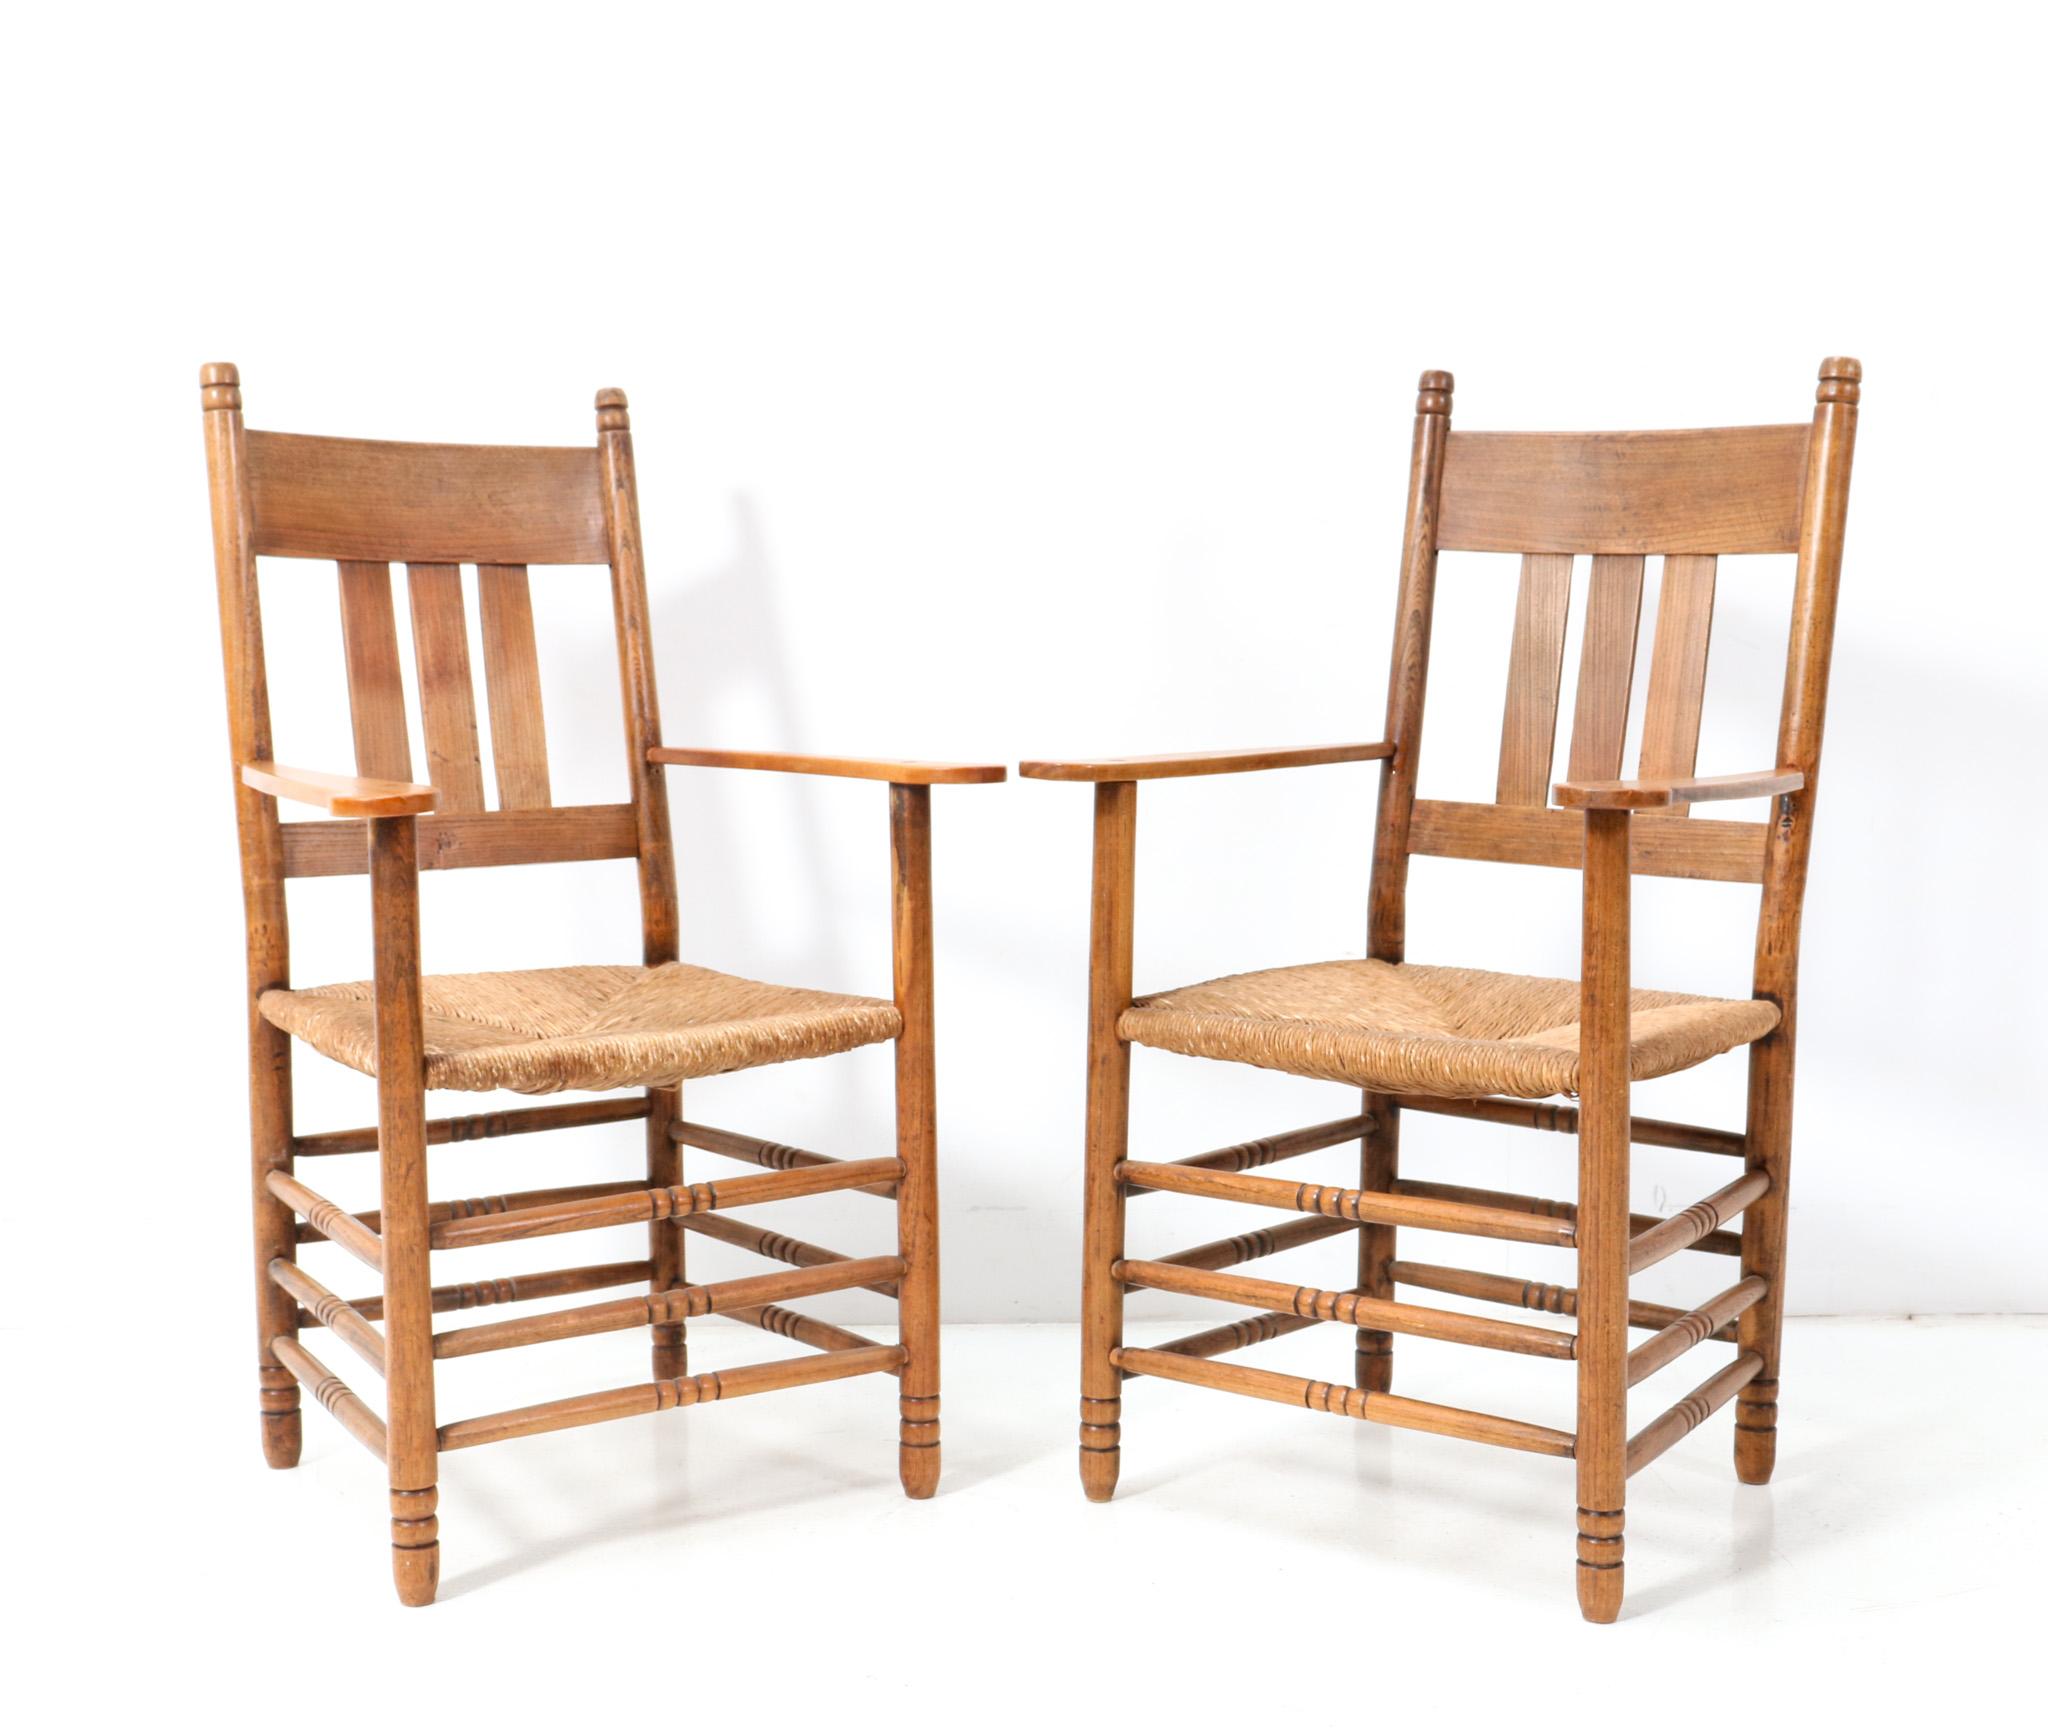 Stunning and rare pair of Art Nouveau armchairs.
Design by Willem Penaat.
Striking Dutch design from the 1900s.
Solid elm frames with original rush seats.
This wonderful pair of Art Nouveau Brabant armchairs by Willem Penaat is in very good